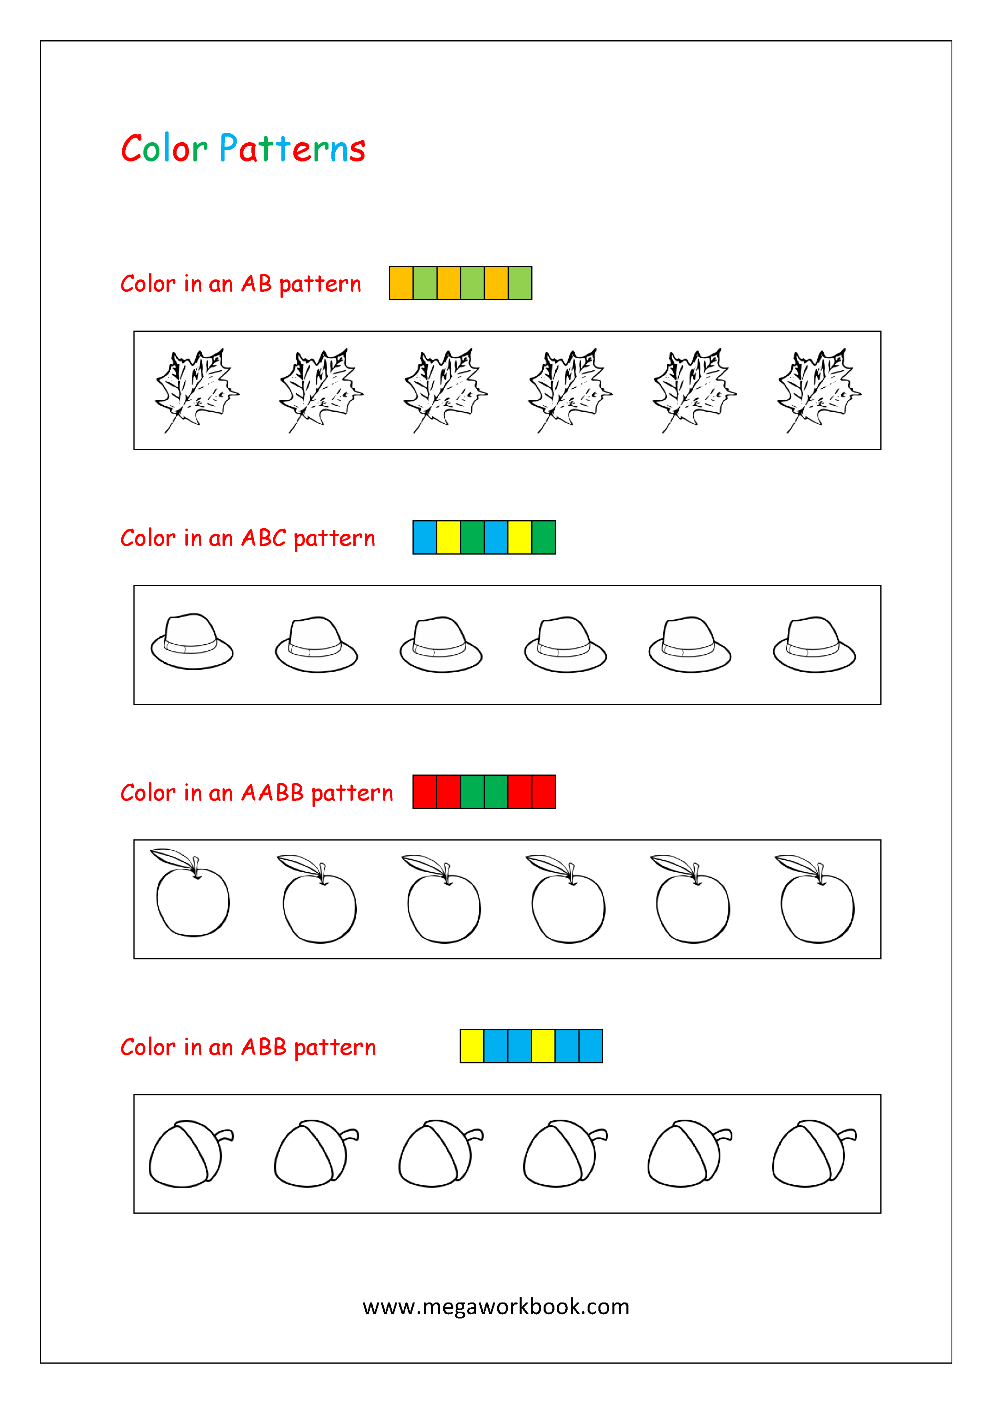 41 Marvelous Ab Pattern Worksheets For Preschool Picture